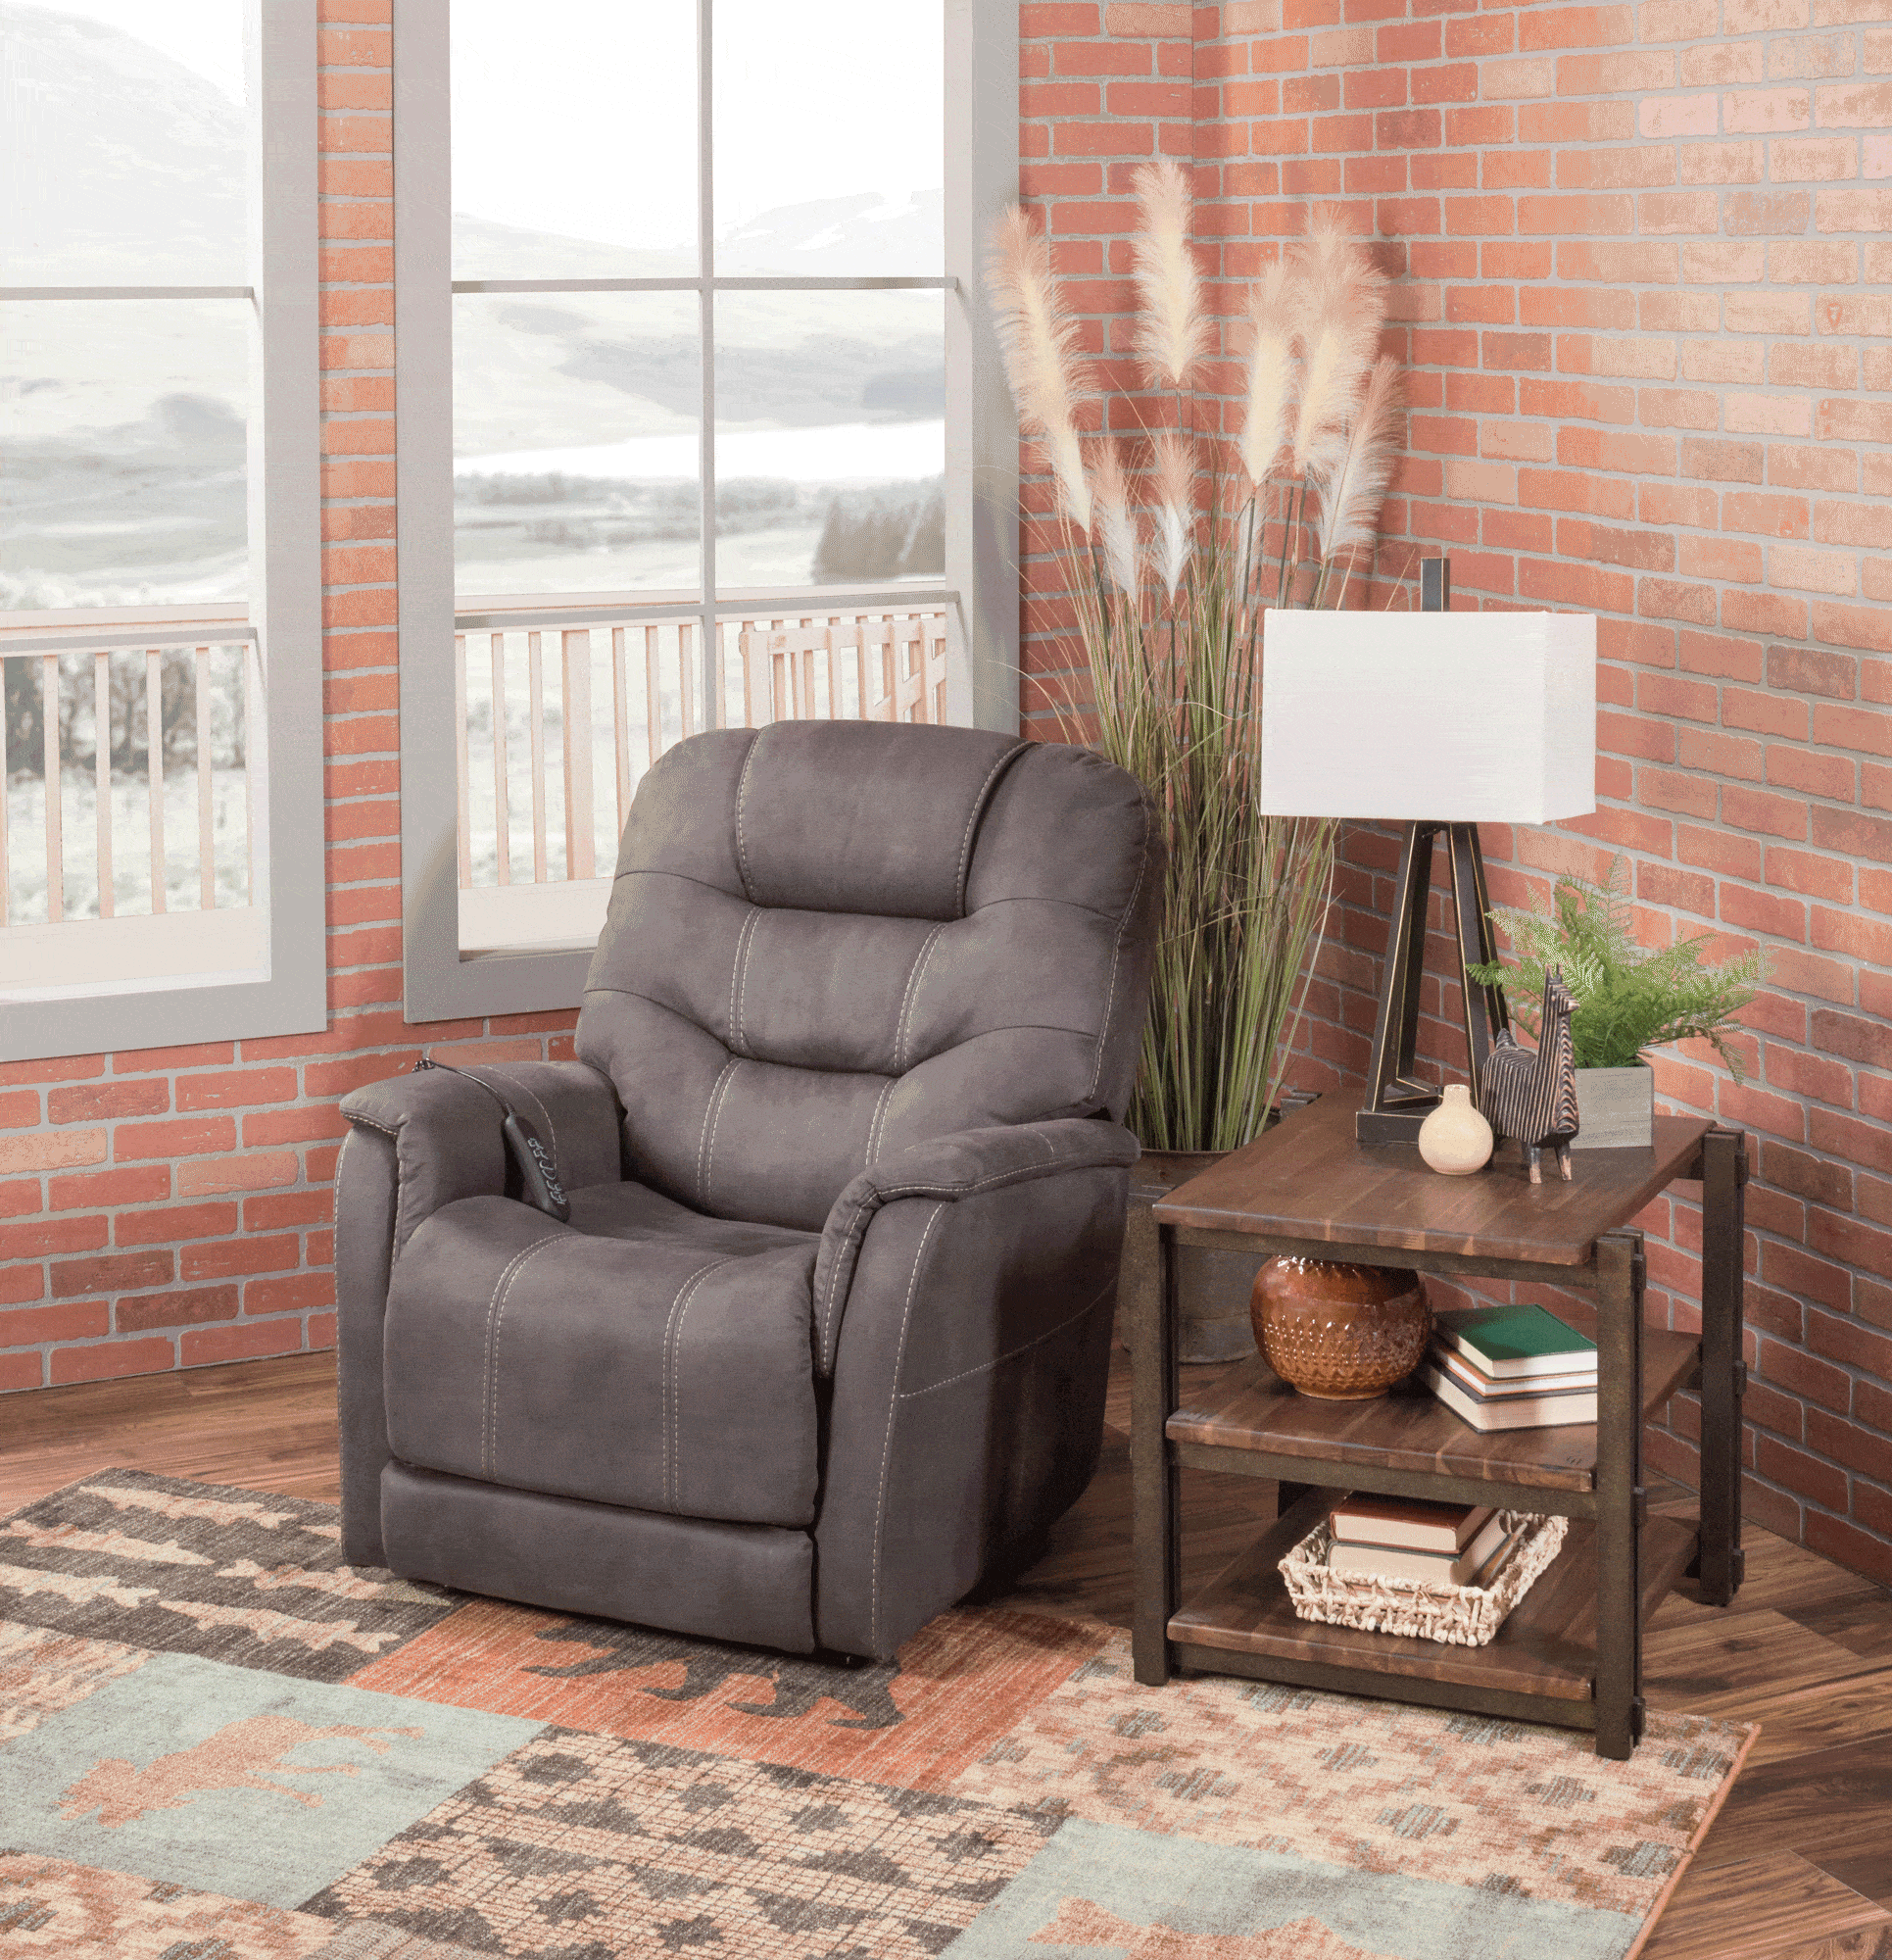 Ballister Power Lift Recliner with Adjustable Headrest by Ashley Furniture